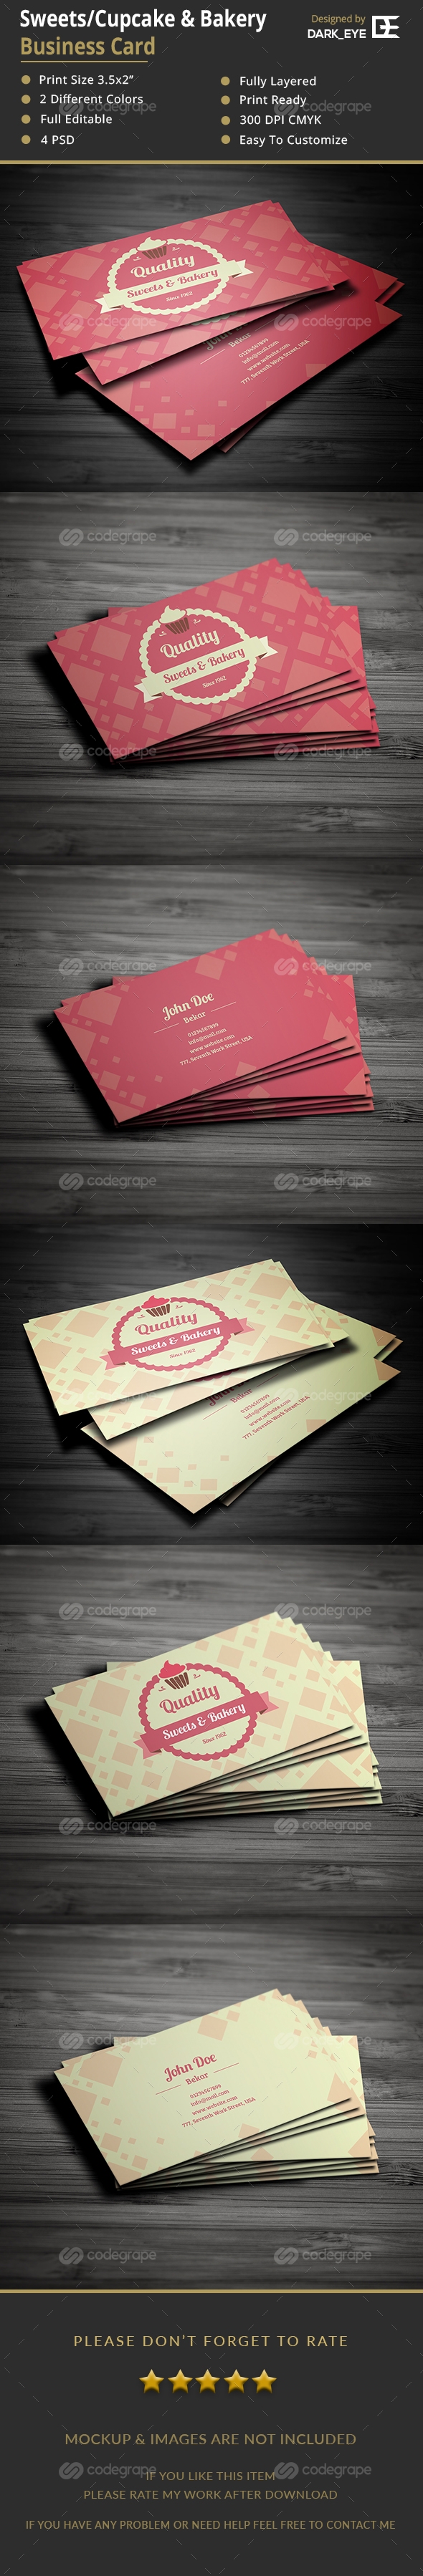 Sweets/Cupcake & Bakery Business Card